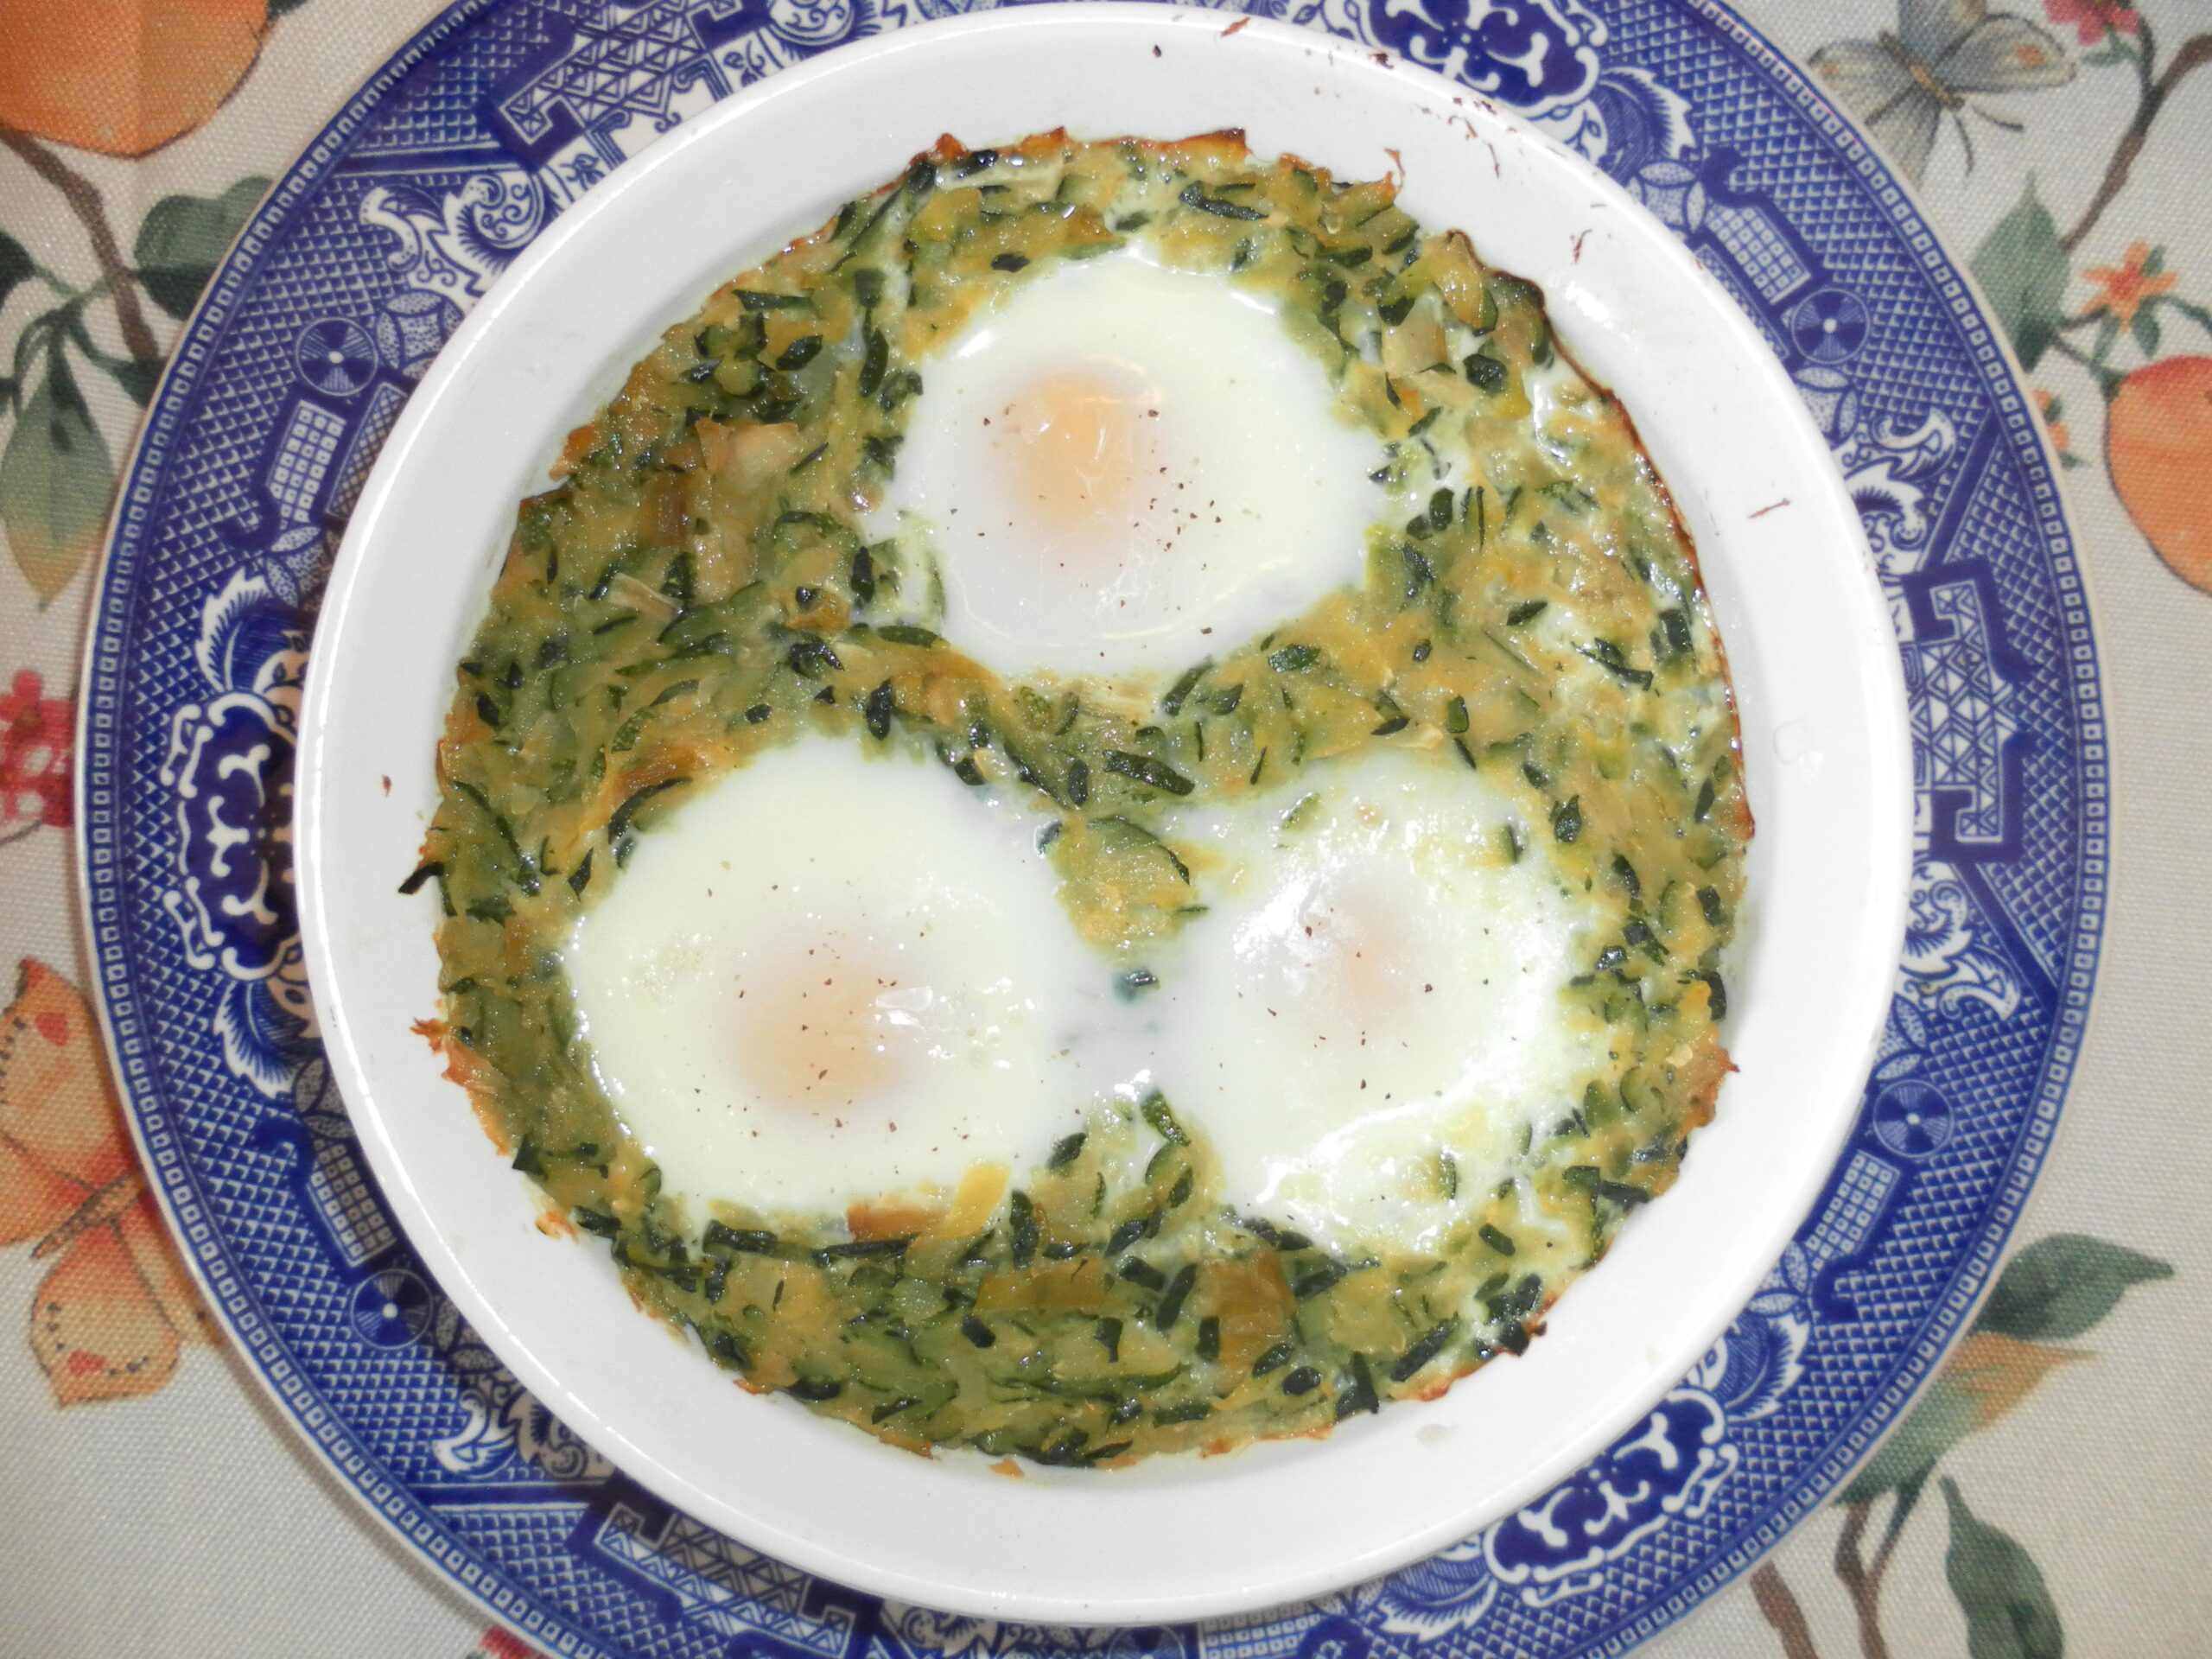  Sink your teeth into the deliciousness of baked eggs in zucchini.